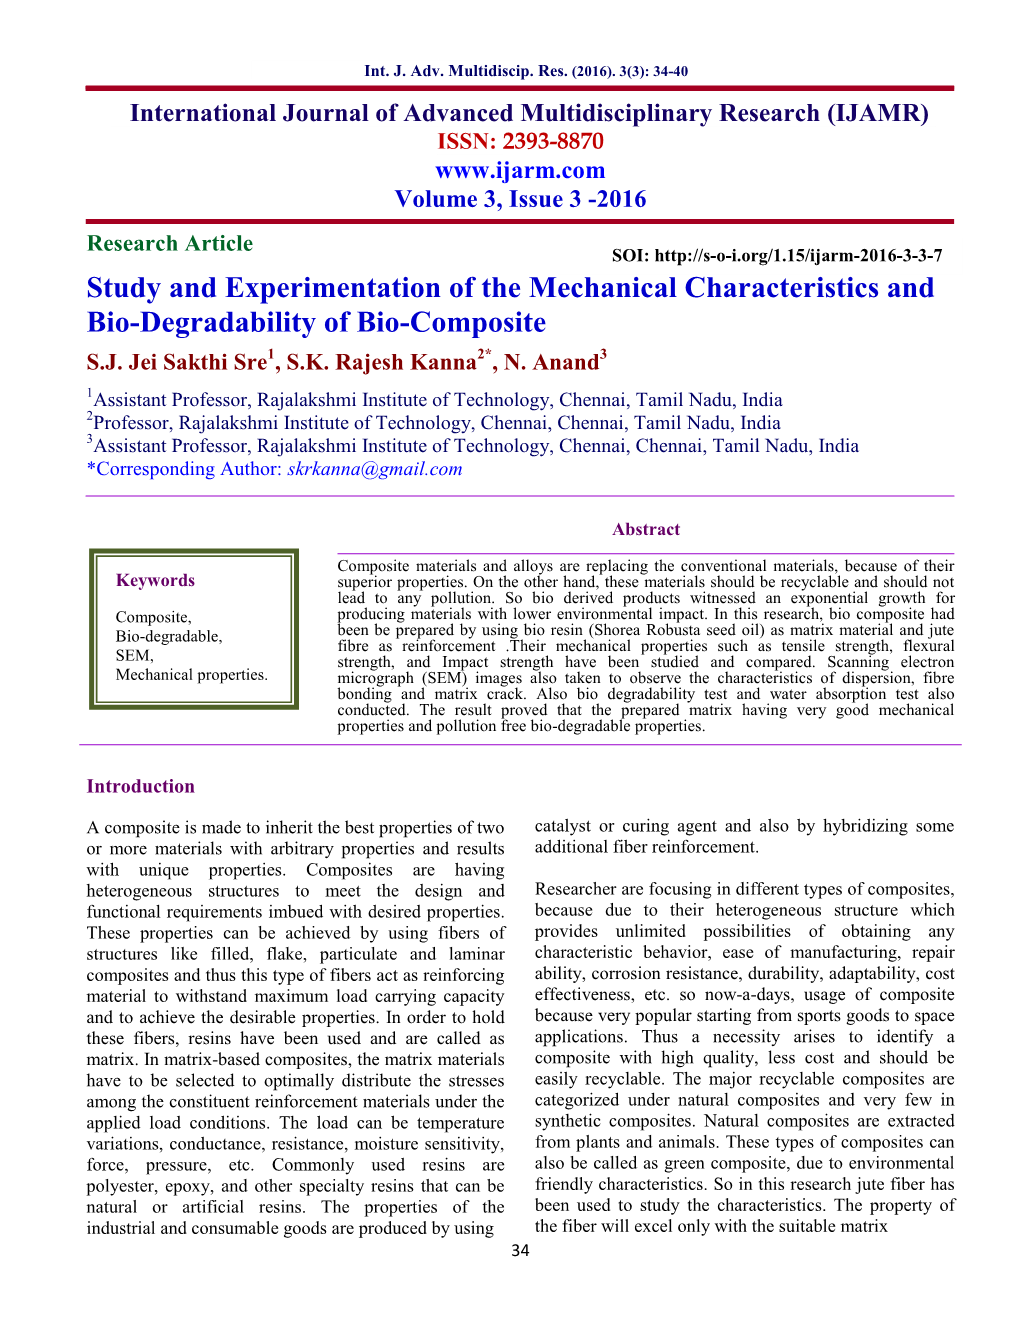 Study and Experimentation of the Mechanical Characteristics and Bio-Degradability of Bio-Composite S.J